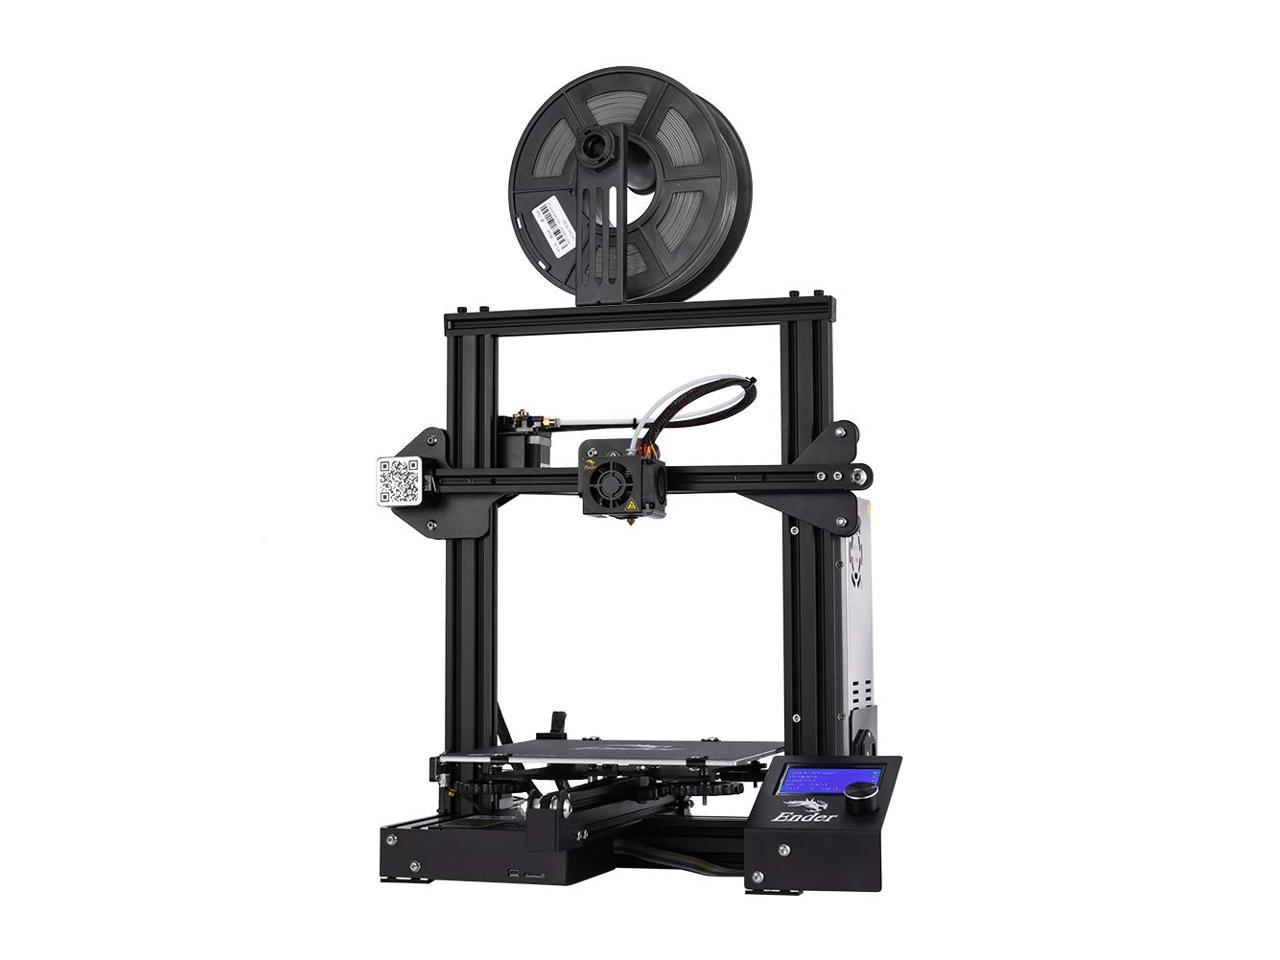 Creality Ender 3 3D Printer Fully Open Source with Resume Printing All Metal Frame FDM DIY Printers 220x220x250mm